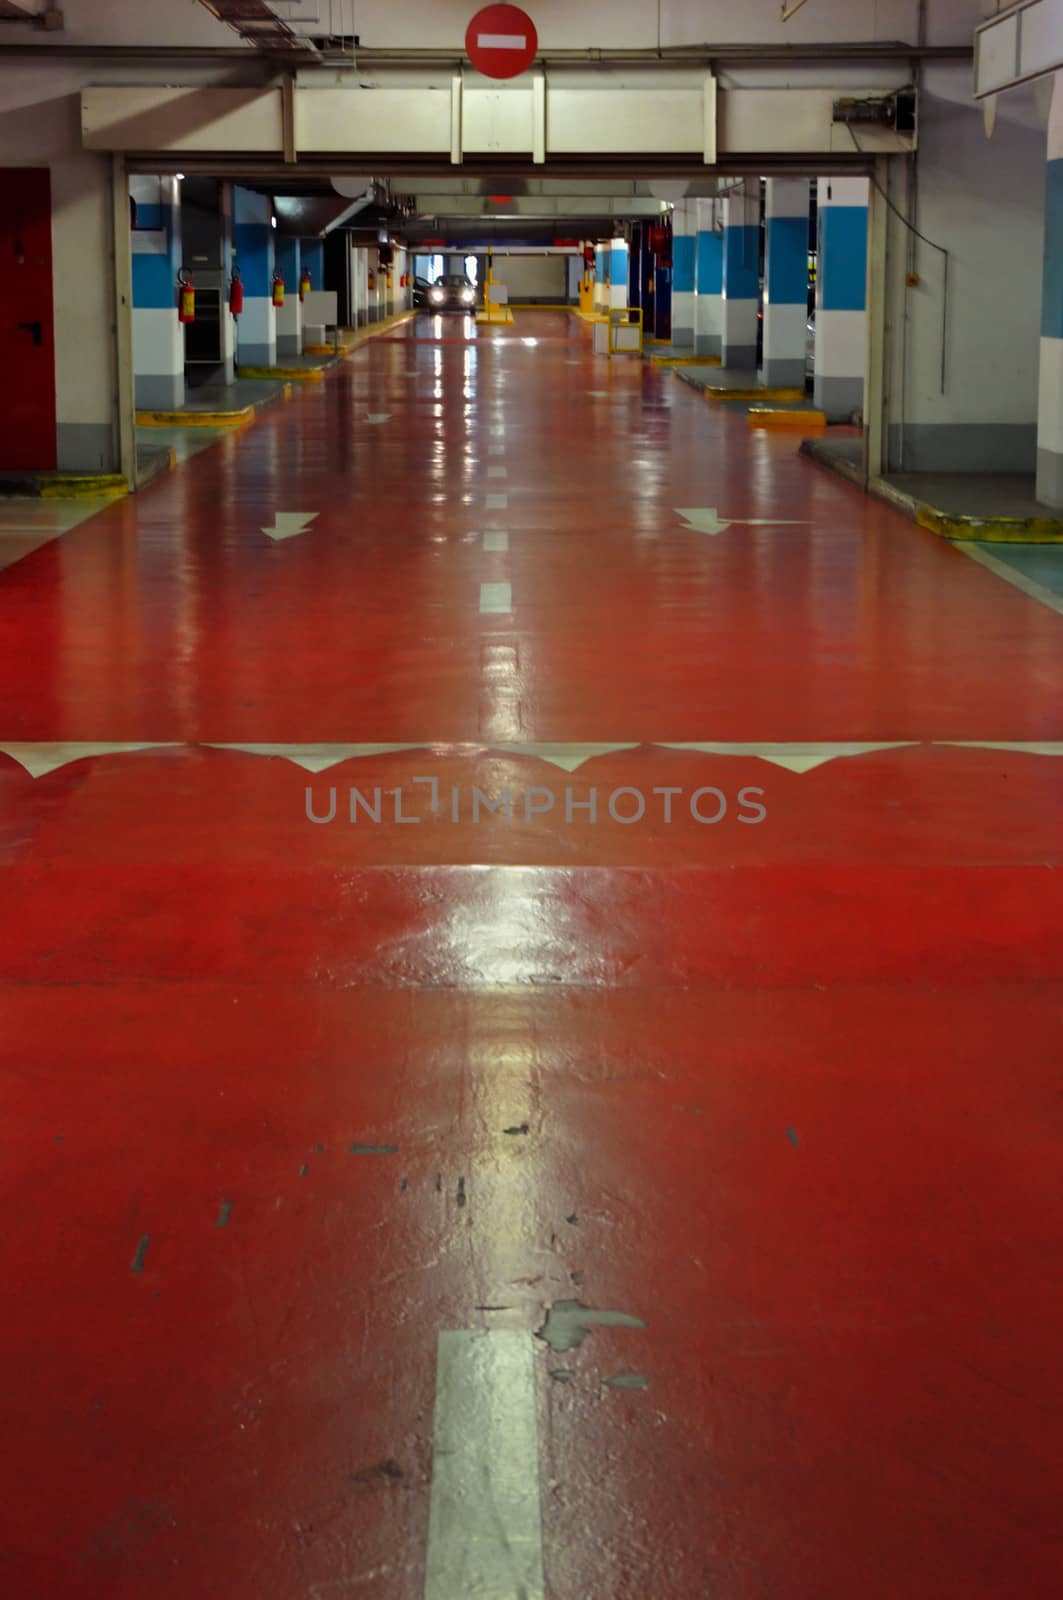 Underground multi-storey car park interior. Red driveway and approaching car.